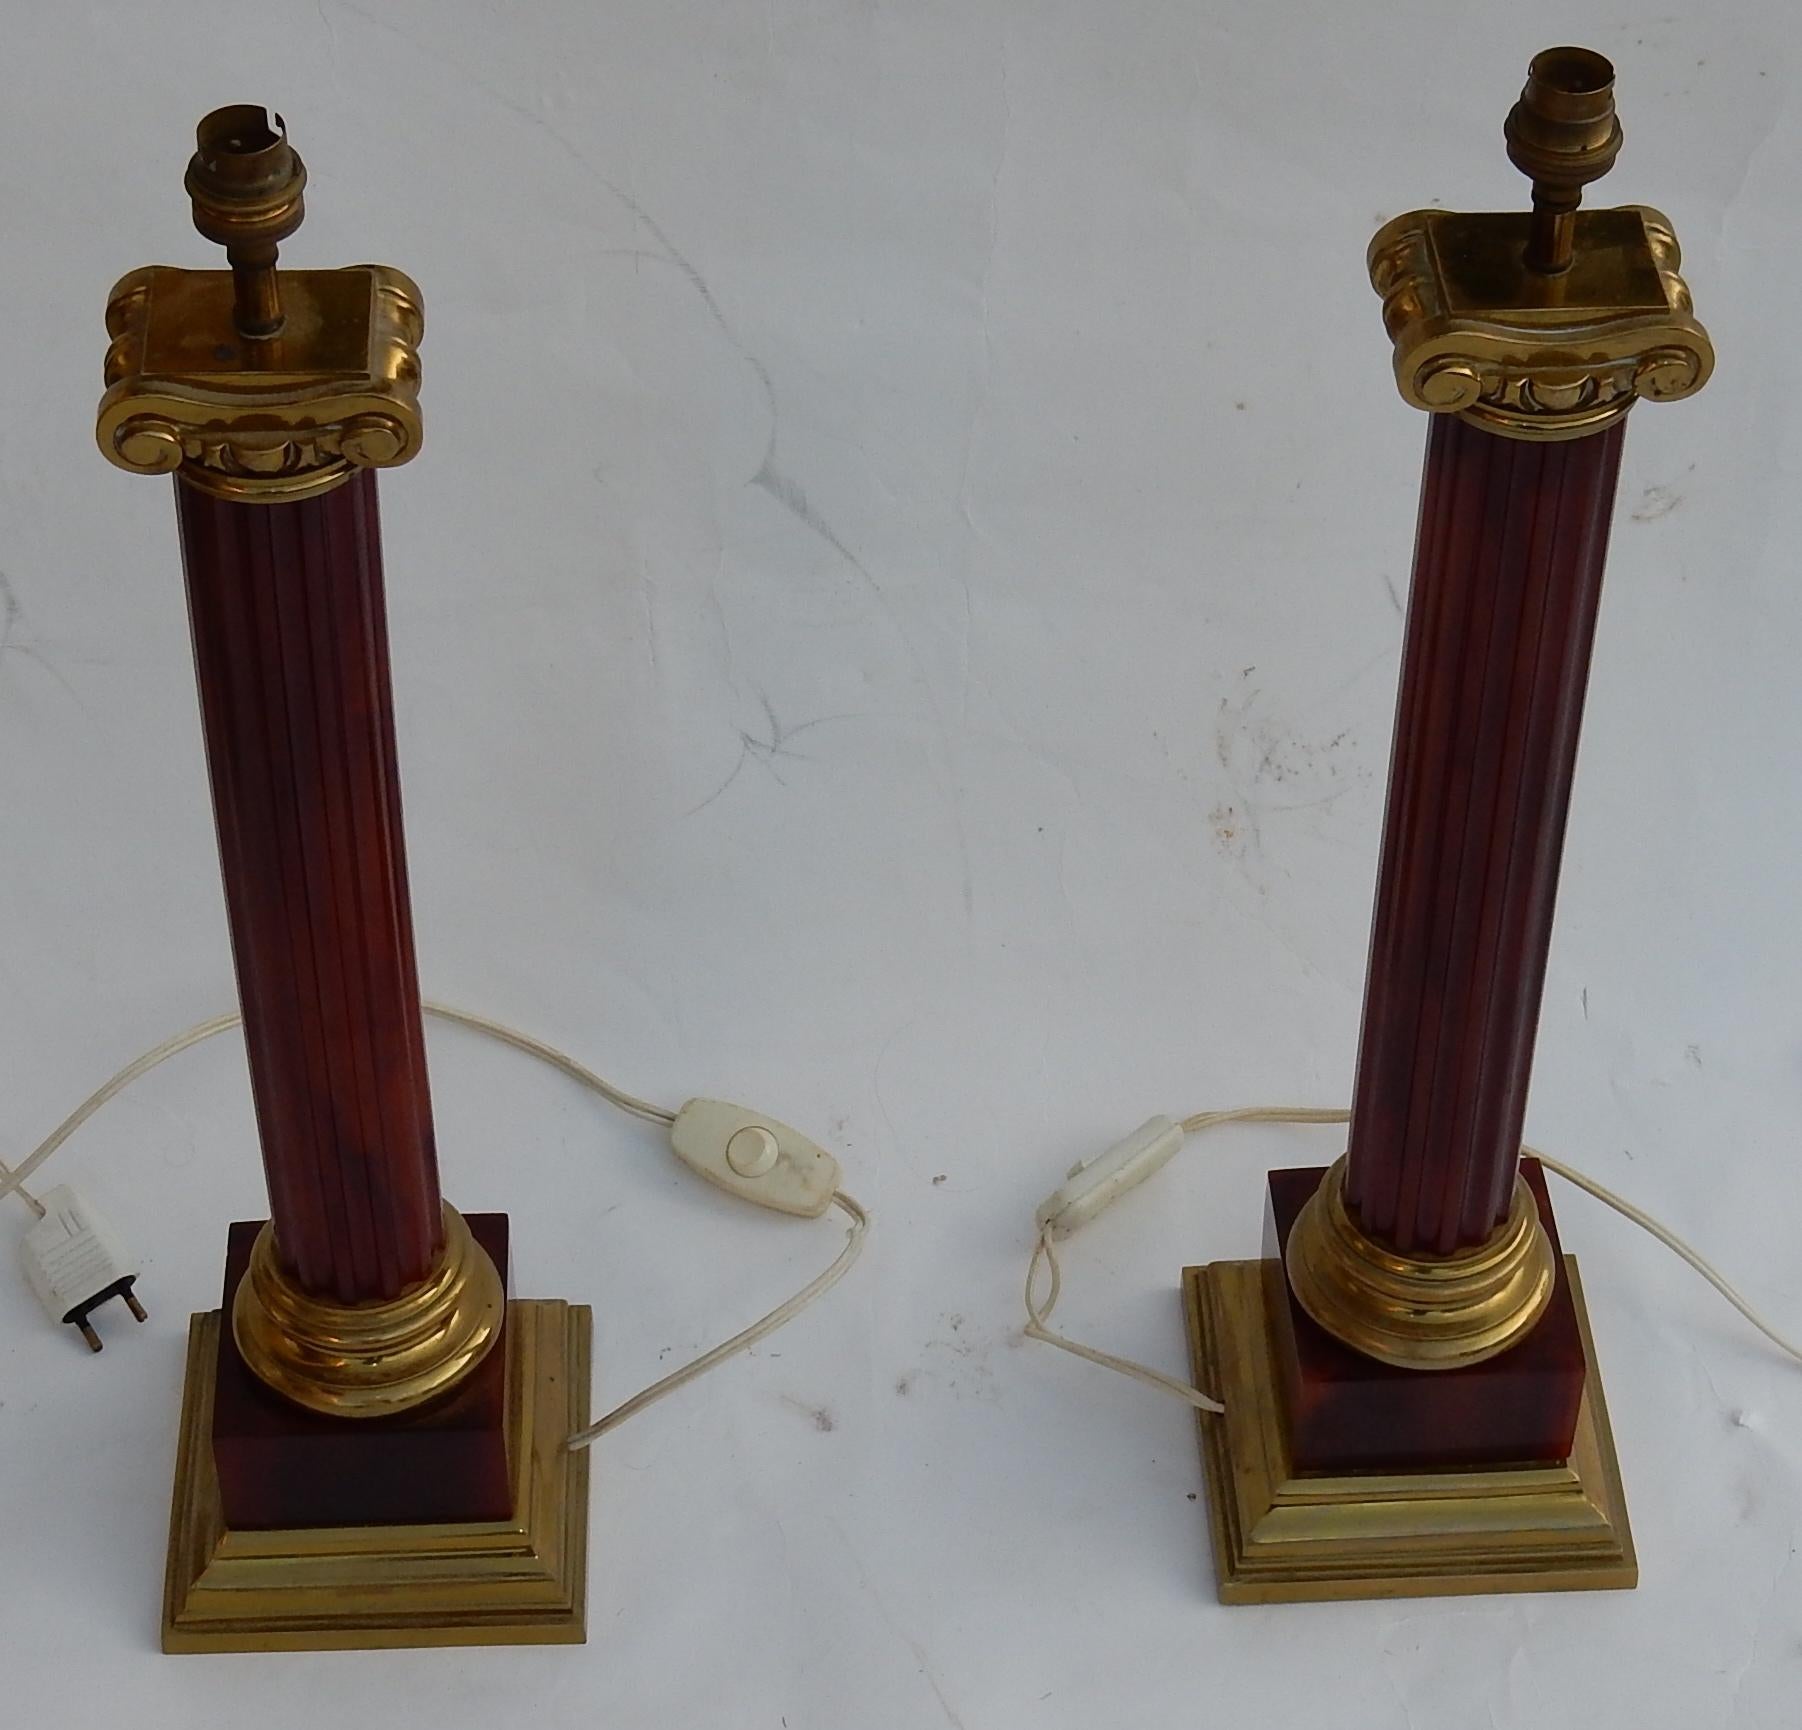 1950-1970 Pair of Maison Jansen Lamps, Gilt Bronze and Bakelite, Amber Color For Sale 4